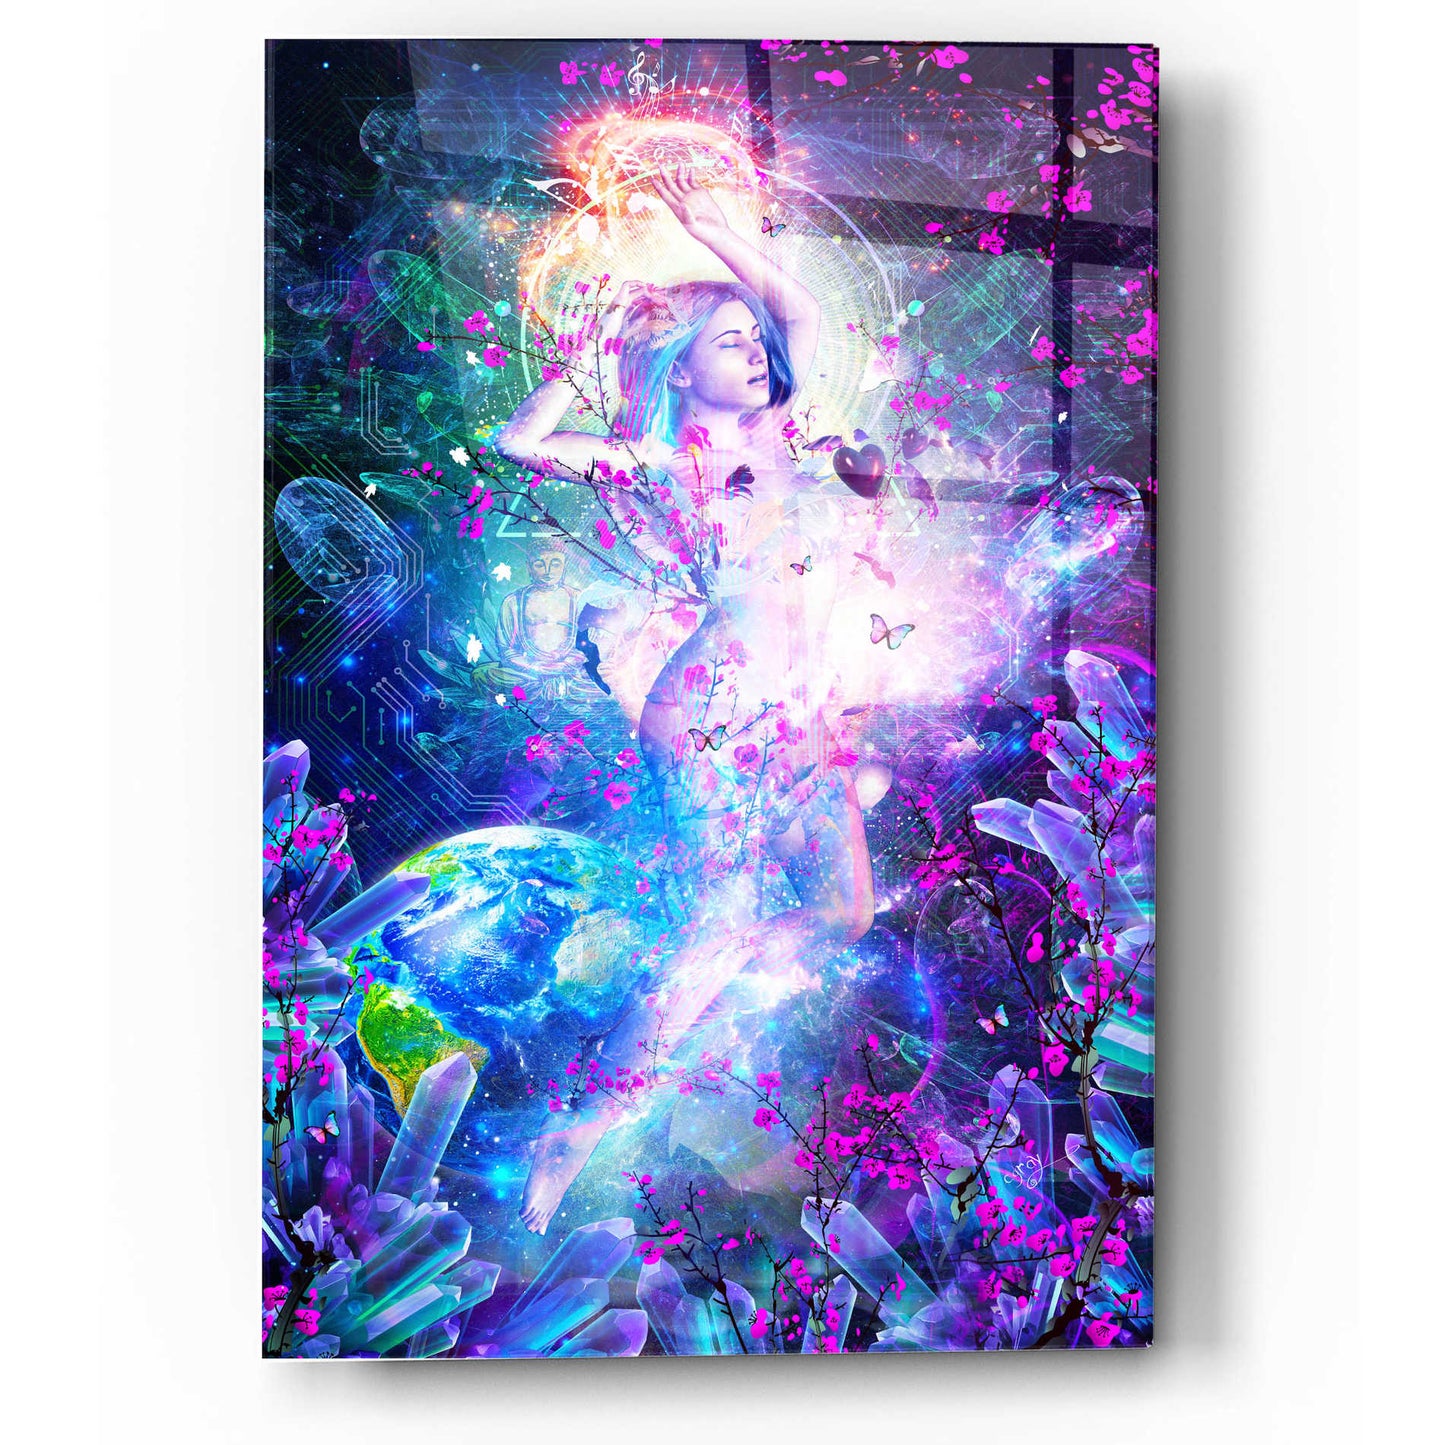 Epic Art 'Encounter With The Sublime' by Cameron Gray, Acrylic Glass Wall Art,12x16